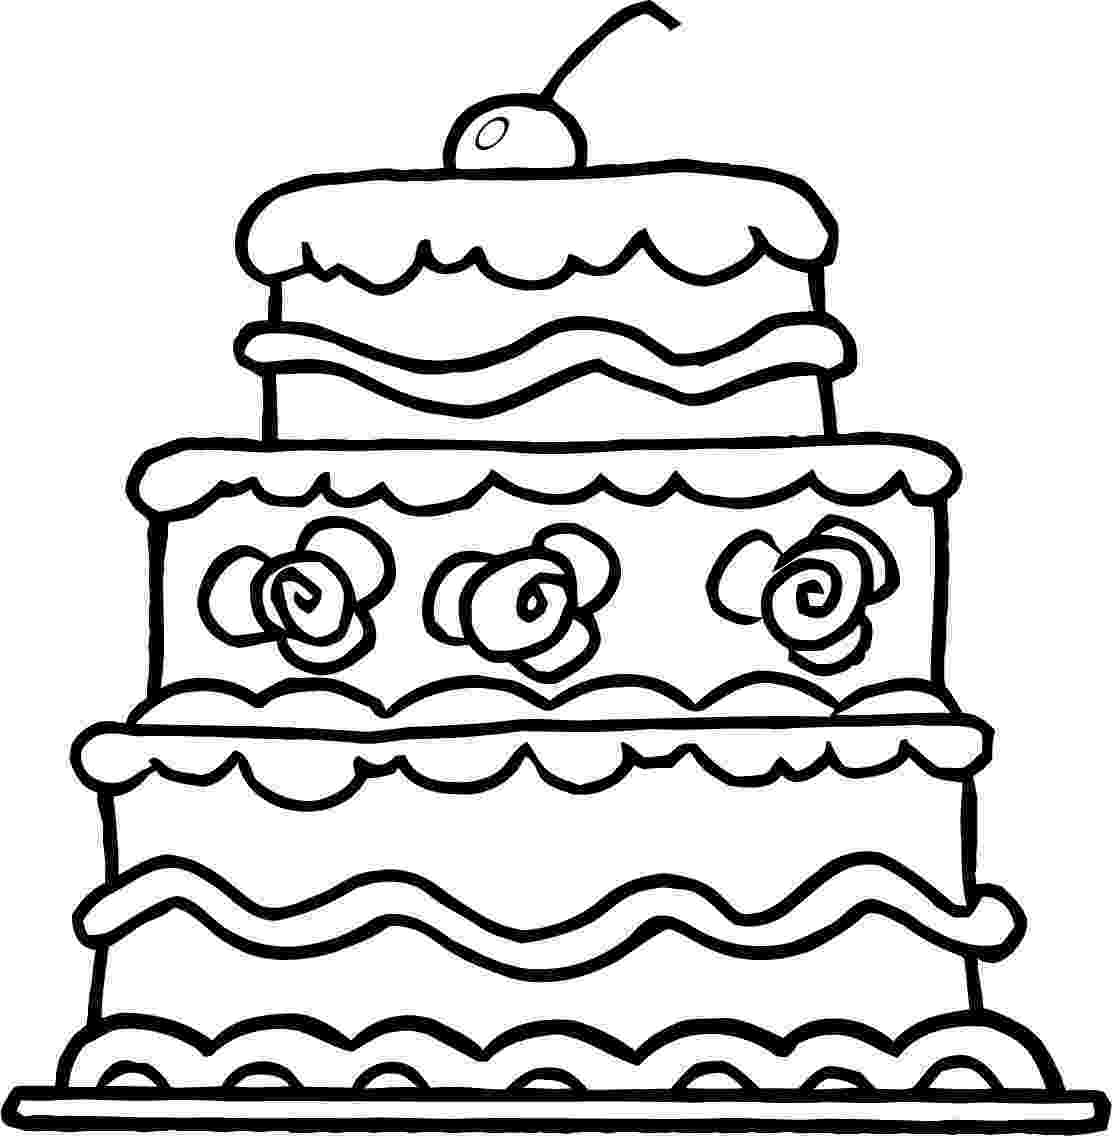 colouring picture cake birthday cake coloring page birthday coloring pages cake picture colouring 